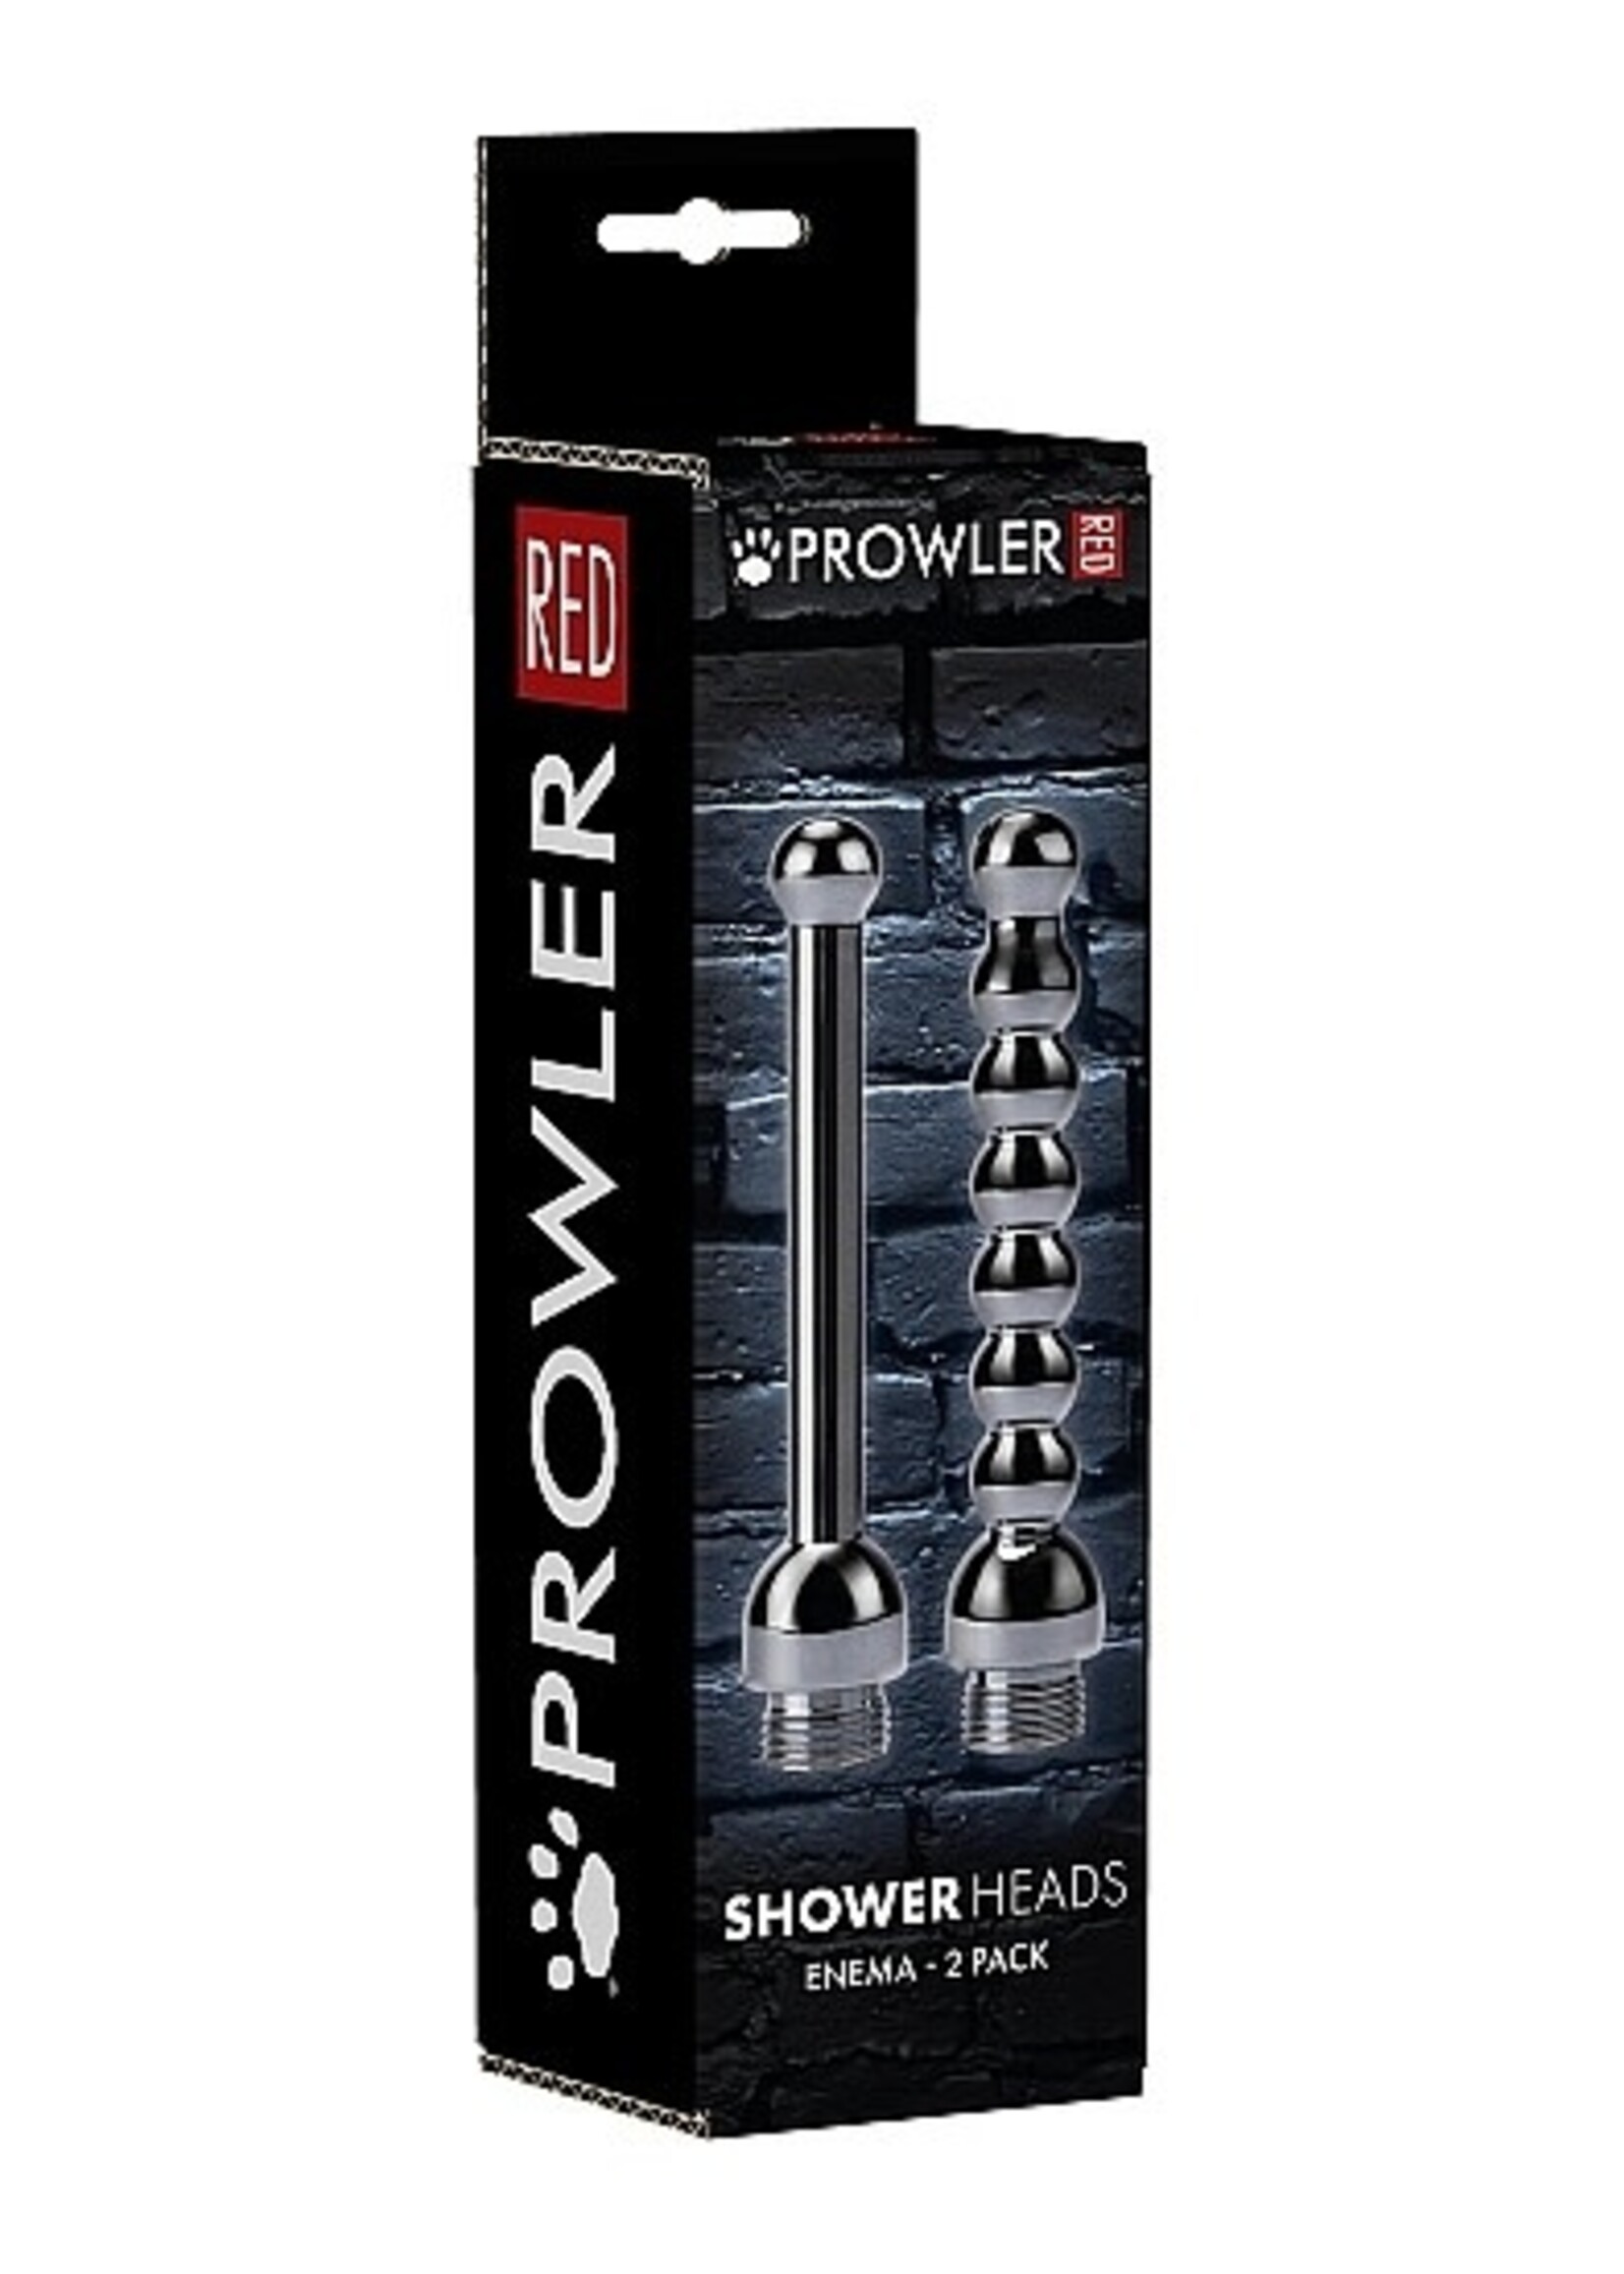 PROWLER RED Shower heads